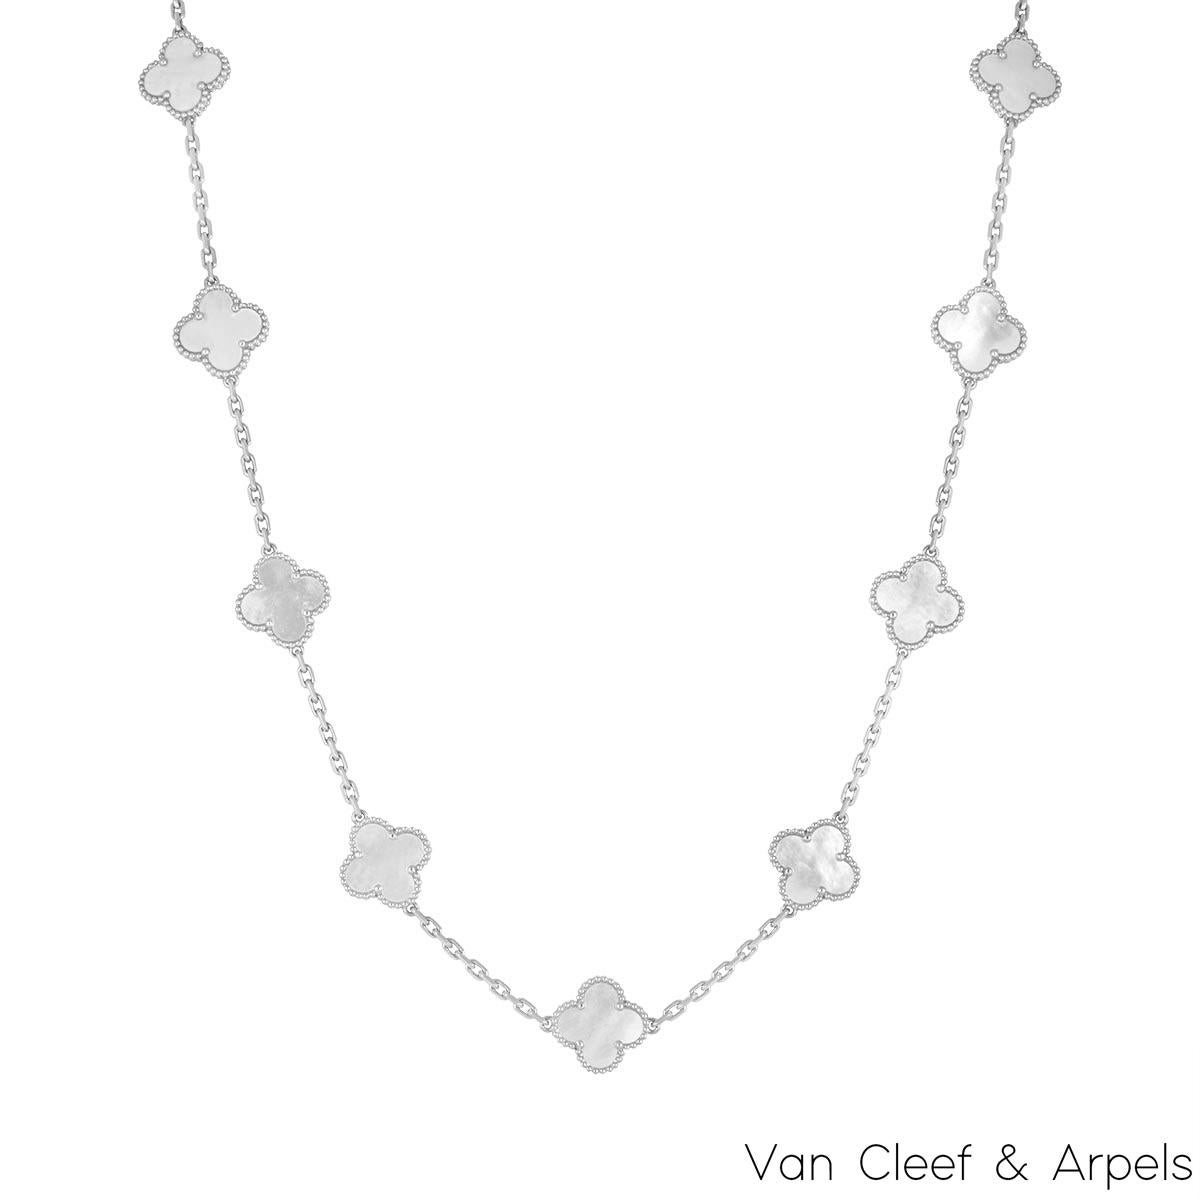 A beautiful 18k white gold mother of pearl necklace from the Vintage Alhambra (VCARF48800) collection by Van Cleef & Arpels. Featuring 20 iconic clover motifs, each motif is set with a beaded edge and a mother of pearl inlay, set throughout the